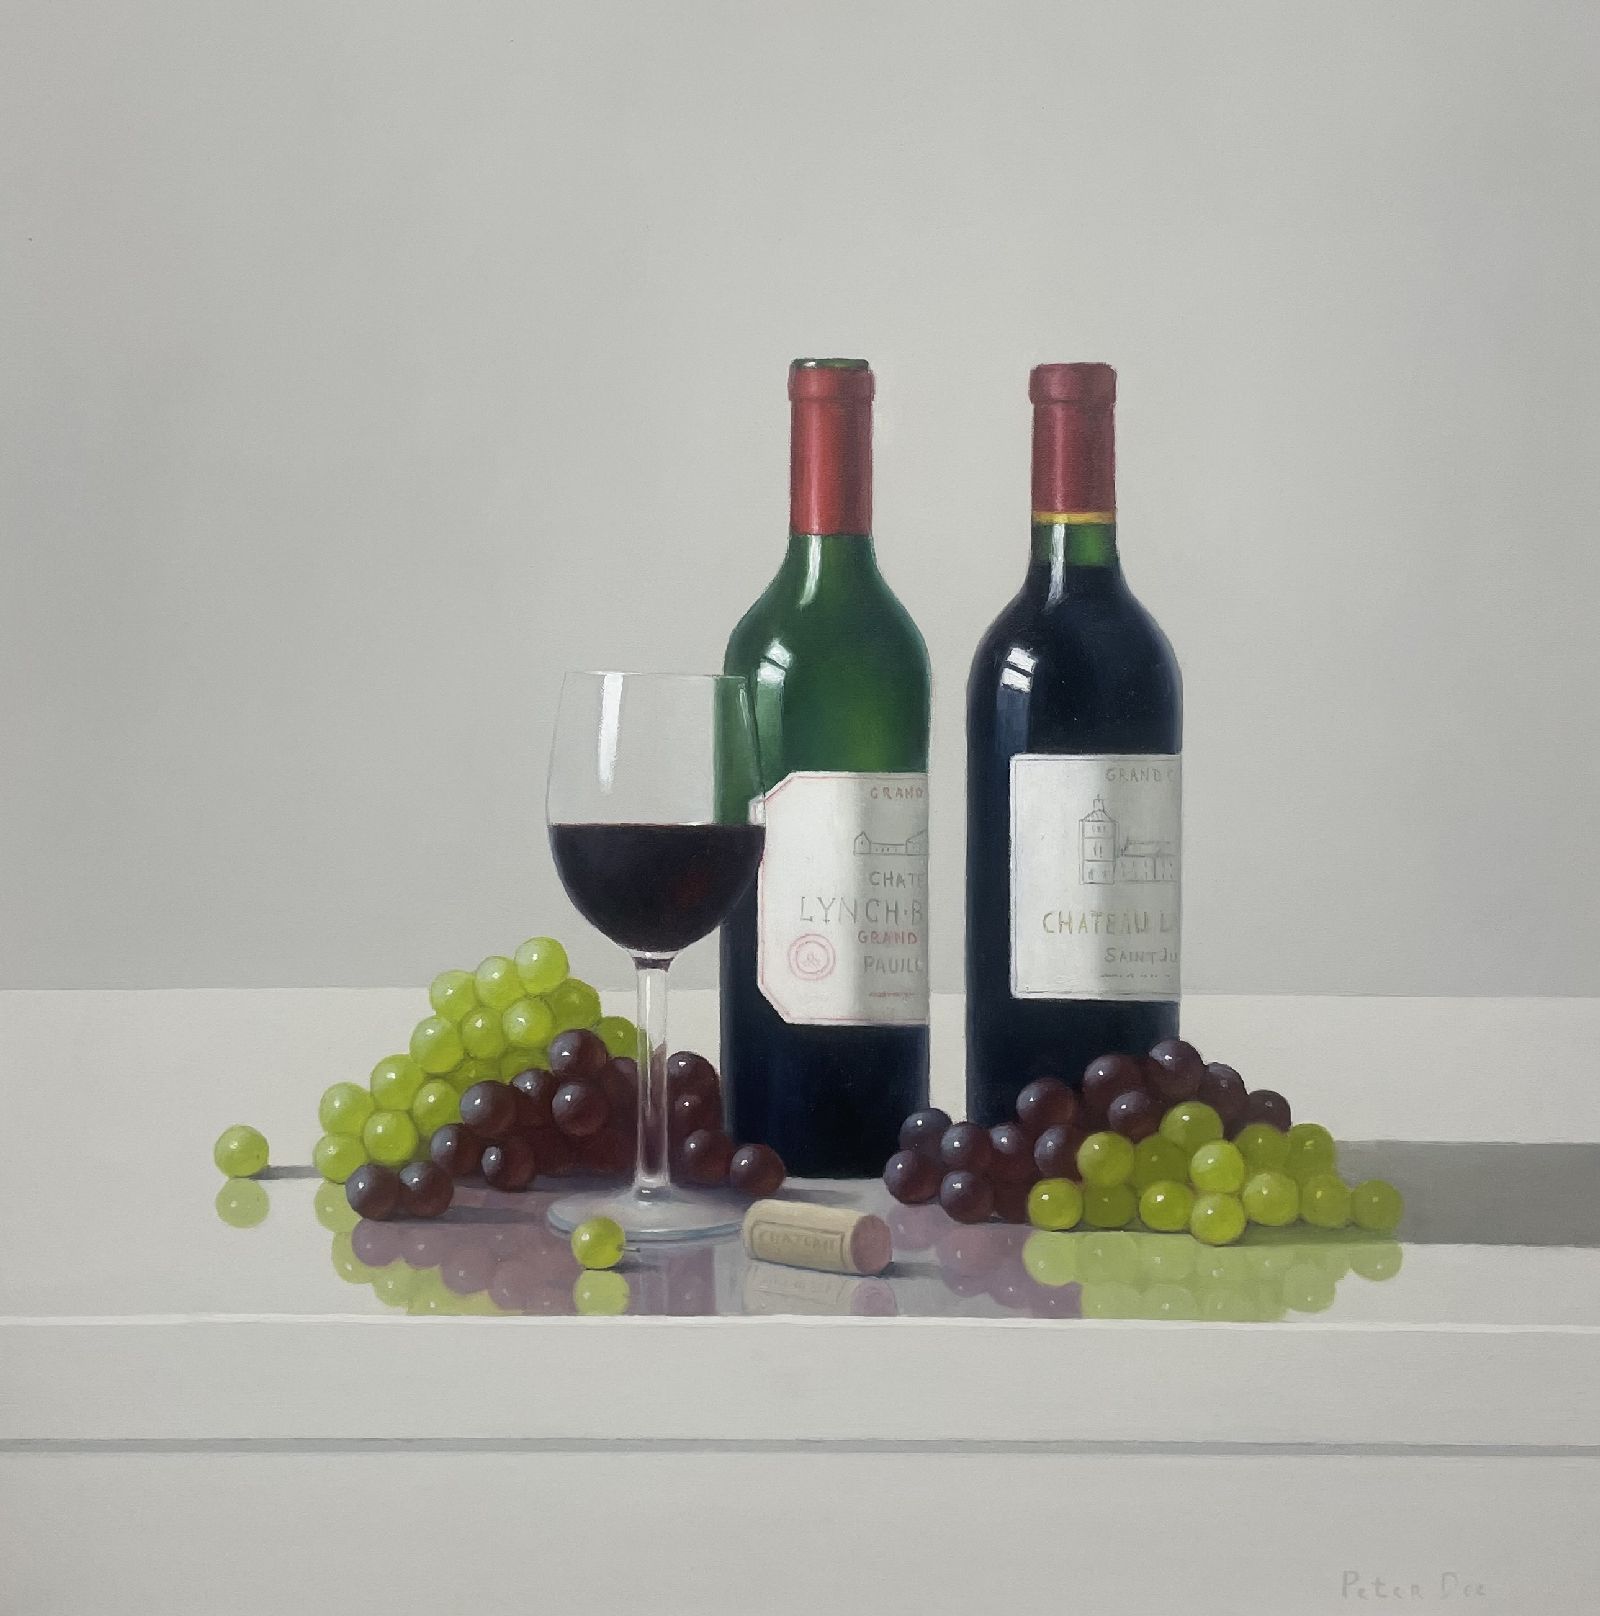 Wine and Grapes by Peter Dee